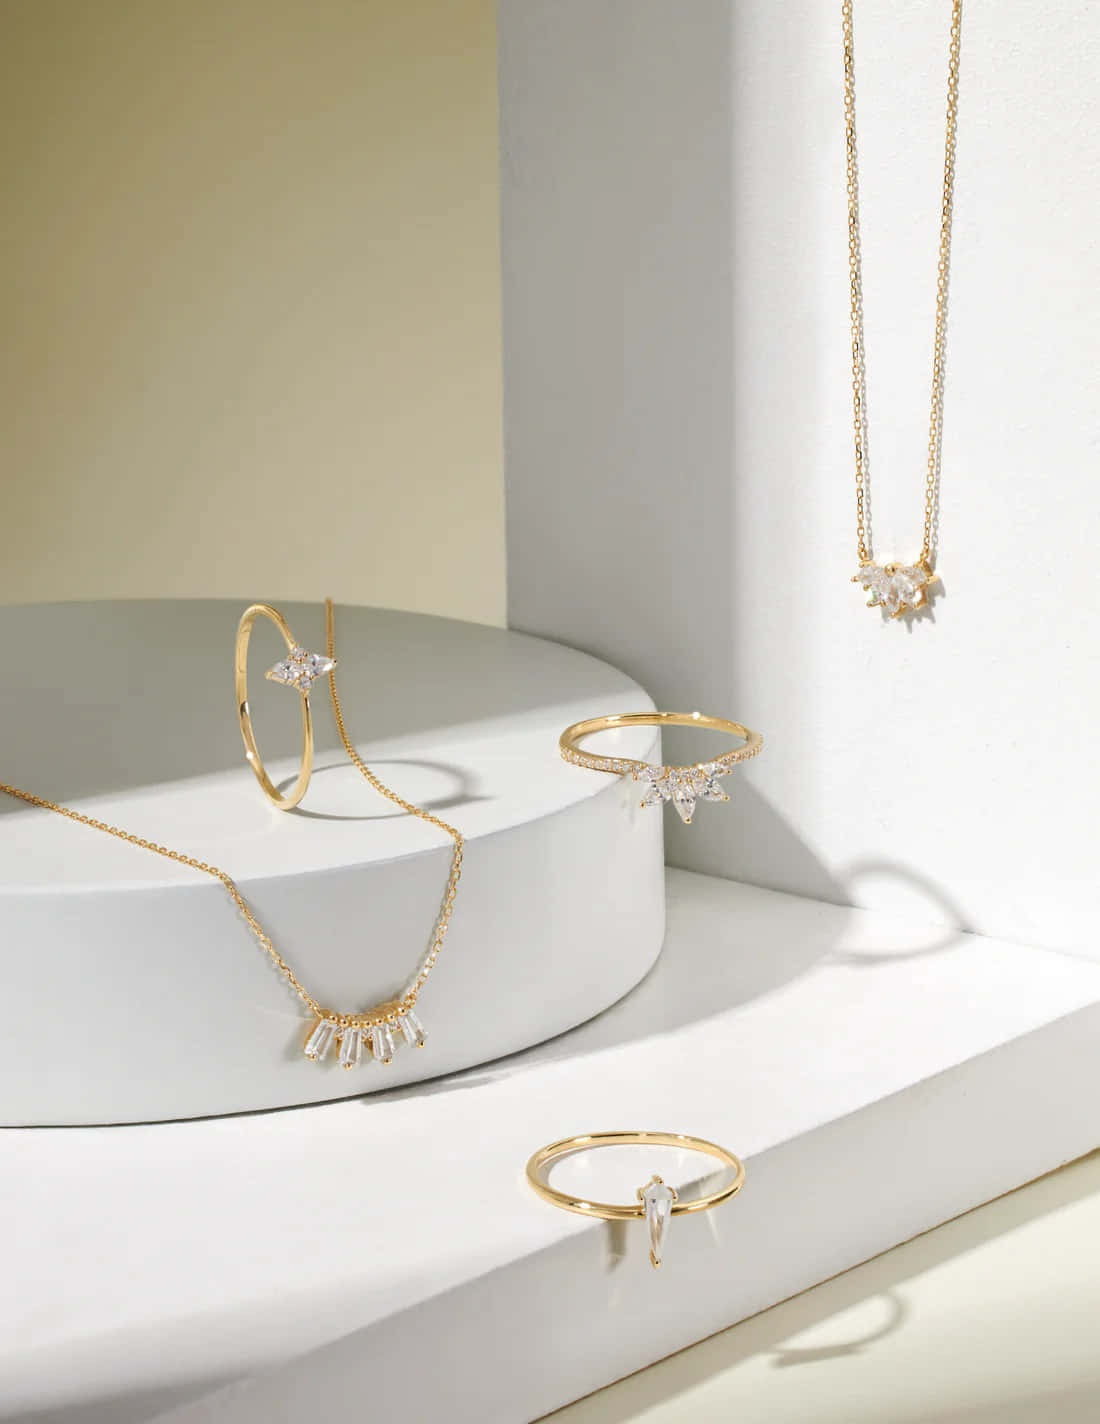 A Gold Necklace, Earrings, And Bracelet On A White Table